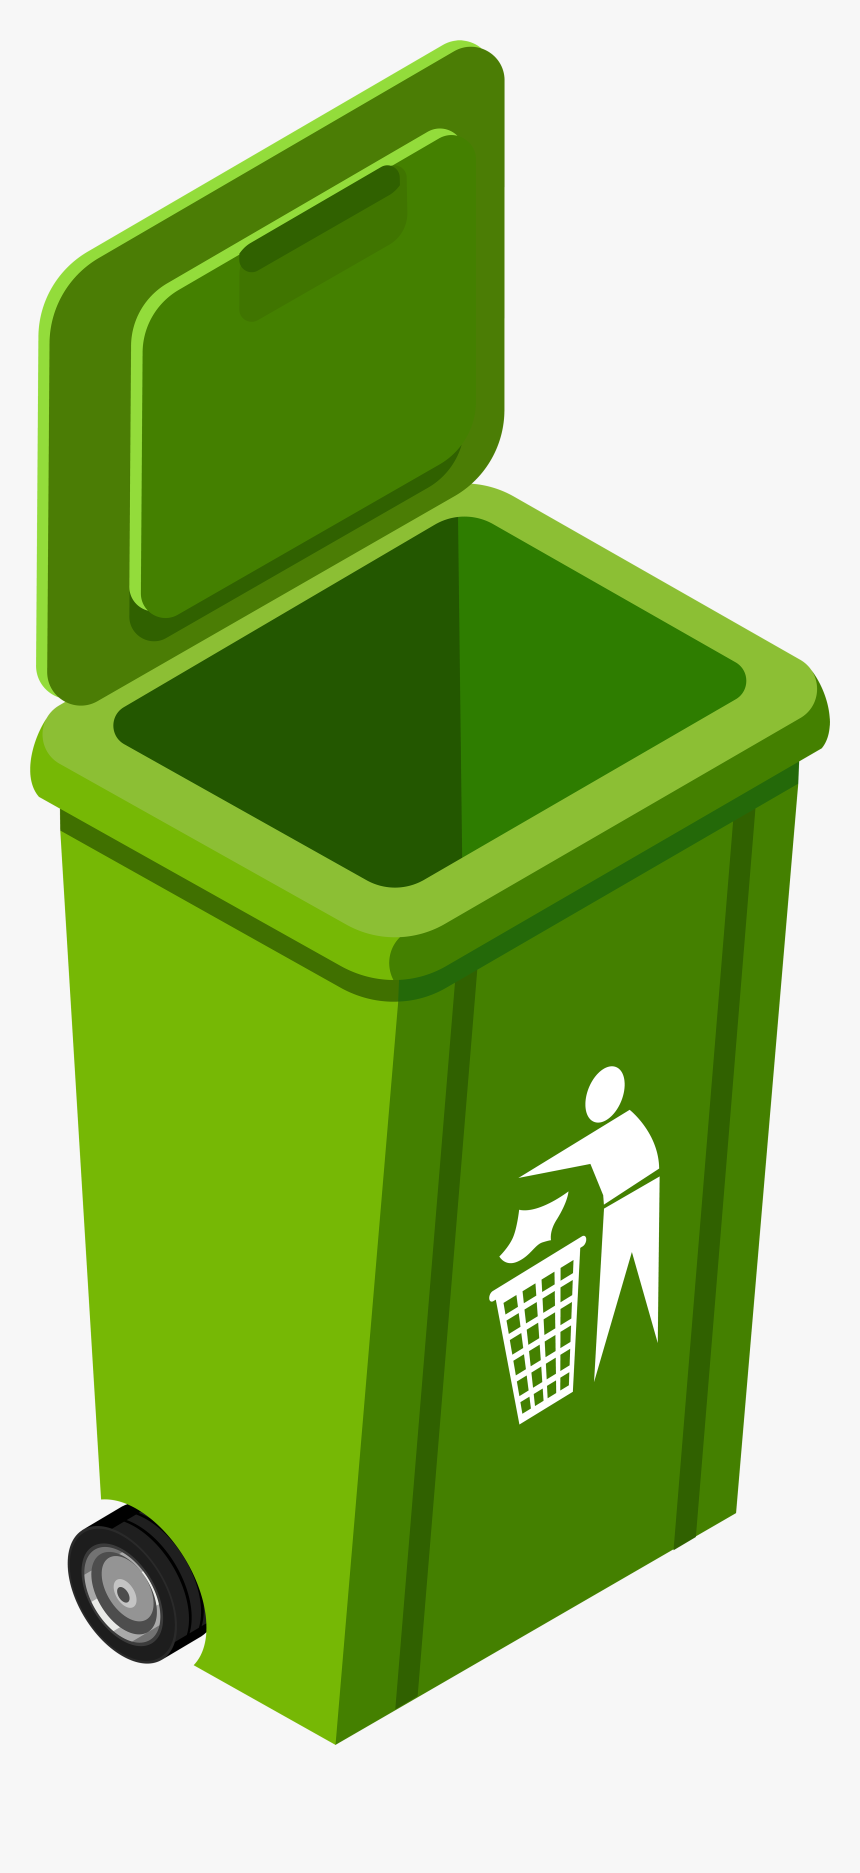 Green Trash Can Image - Clipart Garbage Bin Png, Transparent Png, Free Download